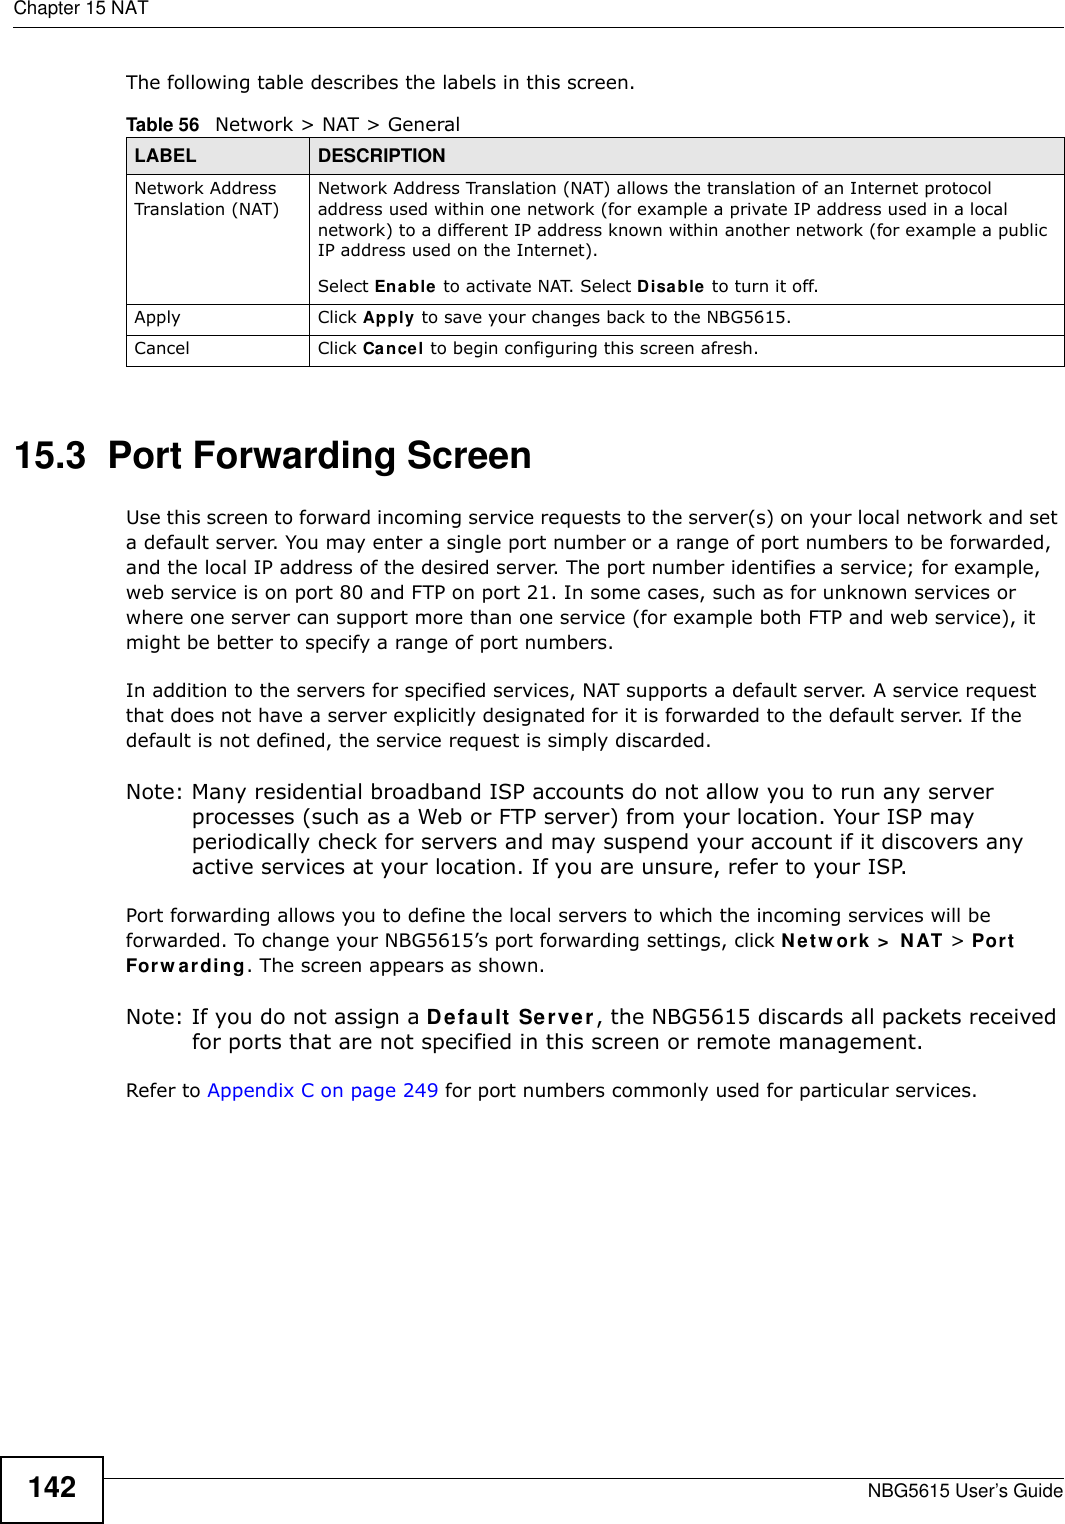 Chapter 15 NATNBG5615 User’s Guide142The following table describes the labels in this screen.15.3  Port Forwarding Screen   Use this screen to forward incoming service requests to the server(s) on your local network and set a default server. You may enter a single port number or a range of port numbers to be forwarded, and the local IP address of the desired server. The port number identifies a service; for example, web service is on port 80 and FTP on port 21. In some cases, such as for unknown services or where one server can support more than one service (for example both FTP and web service), it might be better to specify a range of port numbers.In addition to the servers for specified services, NAT supports a default server. A service request that does not have a server explicitly designated for it is forwarded to the default server. If the default is not defined, the service request is simply discarded.Note: Many residential broadband ISP accounts do not allow you to run any server processes (such as a Web or FTP server) from your location. Your ISP may periodically check for servers and may suspend your account if it discovers any active services at your location. If you are unsure, refer to your ISP.Port forwarding allows you to define the local servers to which the incoming services will be forwarded. To change your NBG5615’s port forwarding settings, click Netw ork &gt;  NAT &gt; Port Forw arding. The screen appears as shown.Note: If you do not assign a Default Server, the NBG5615 discards all packets received for ports that are not specified in this screen or remote management.Refer to Appendix C on page 249 for port numbers commonly used for particular services.Table 56   Network &gt; NAT &gt; GeneralLABEL DESCRIPTIONNetwork Address Translation (NAT)Network Address Translation (NAT) allows the translation of an Internet protocol address used within one network (for example a private IP address used in a local network) to a different IP address known within another network (for example a public IP address used on the Internet). Select Enable to activate NAT. Select Disable to turn it off.Apply Click Apply to save your changes back to the NBG5615.Cancel Click Cancel to begin configuring this screen afresh.